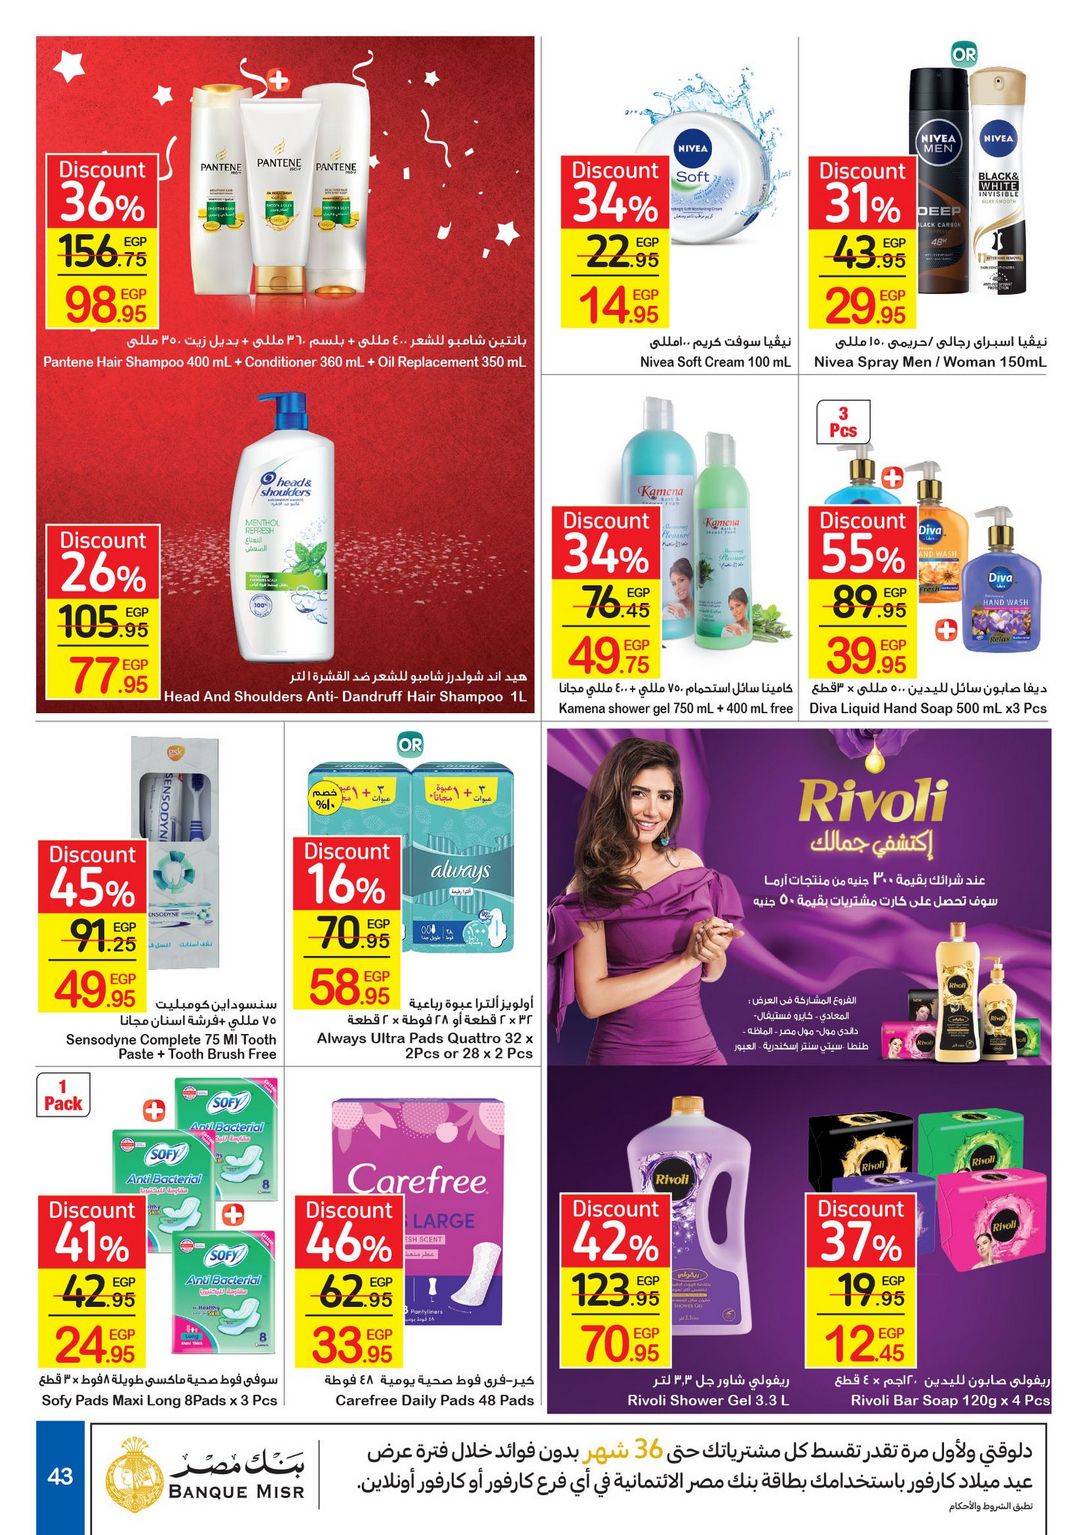 Carrefour Anniversary Offers till 18/2/2021 | Carrefour Egypt 45